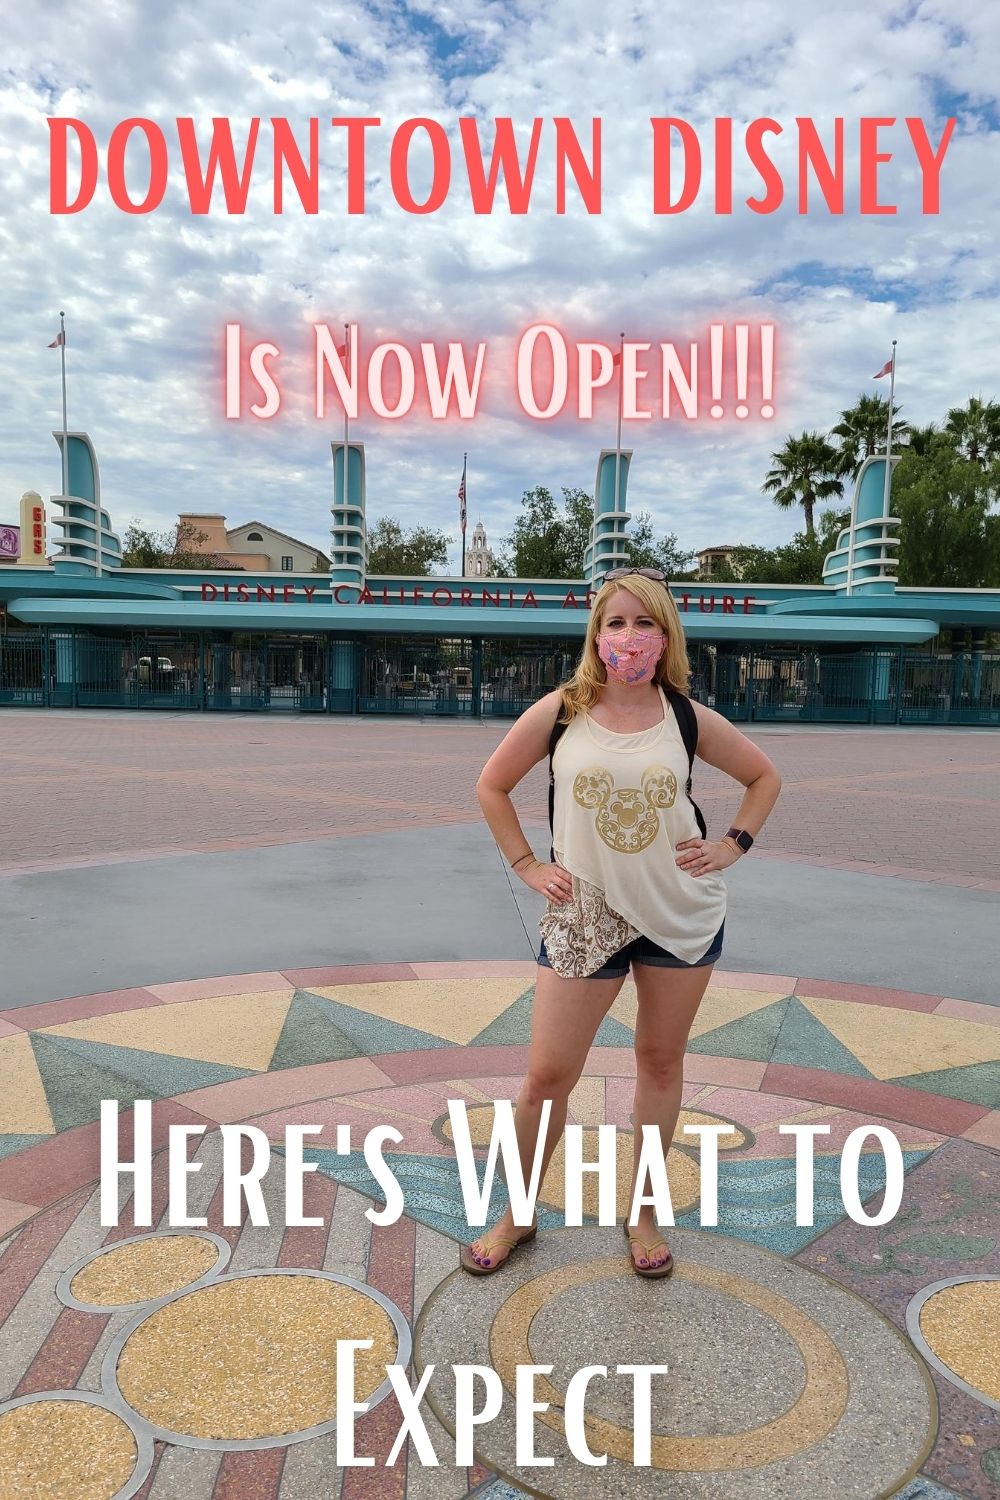 We visit the newly opened Downtown Disney at the Disneyland Resort to see what's open. #downtowndisney #dtd #disneyland #disney